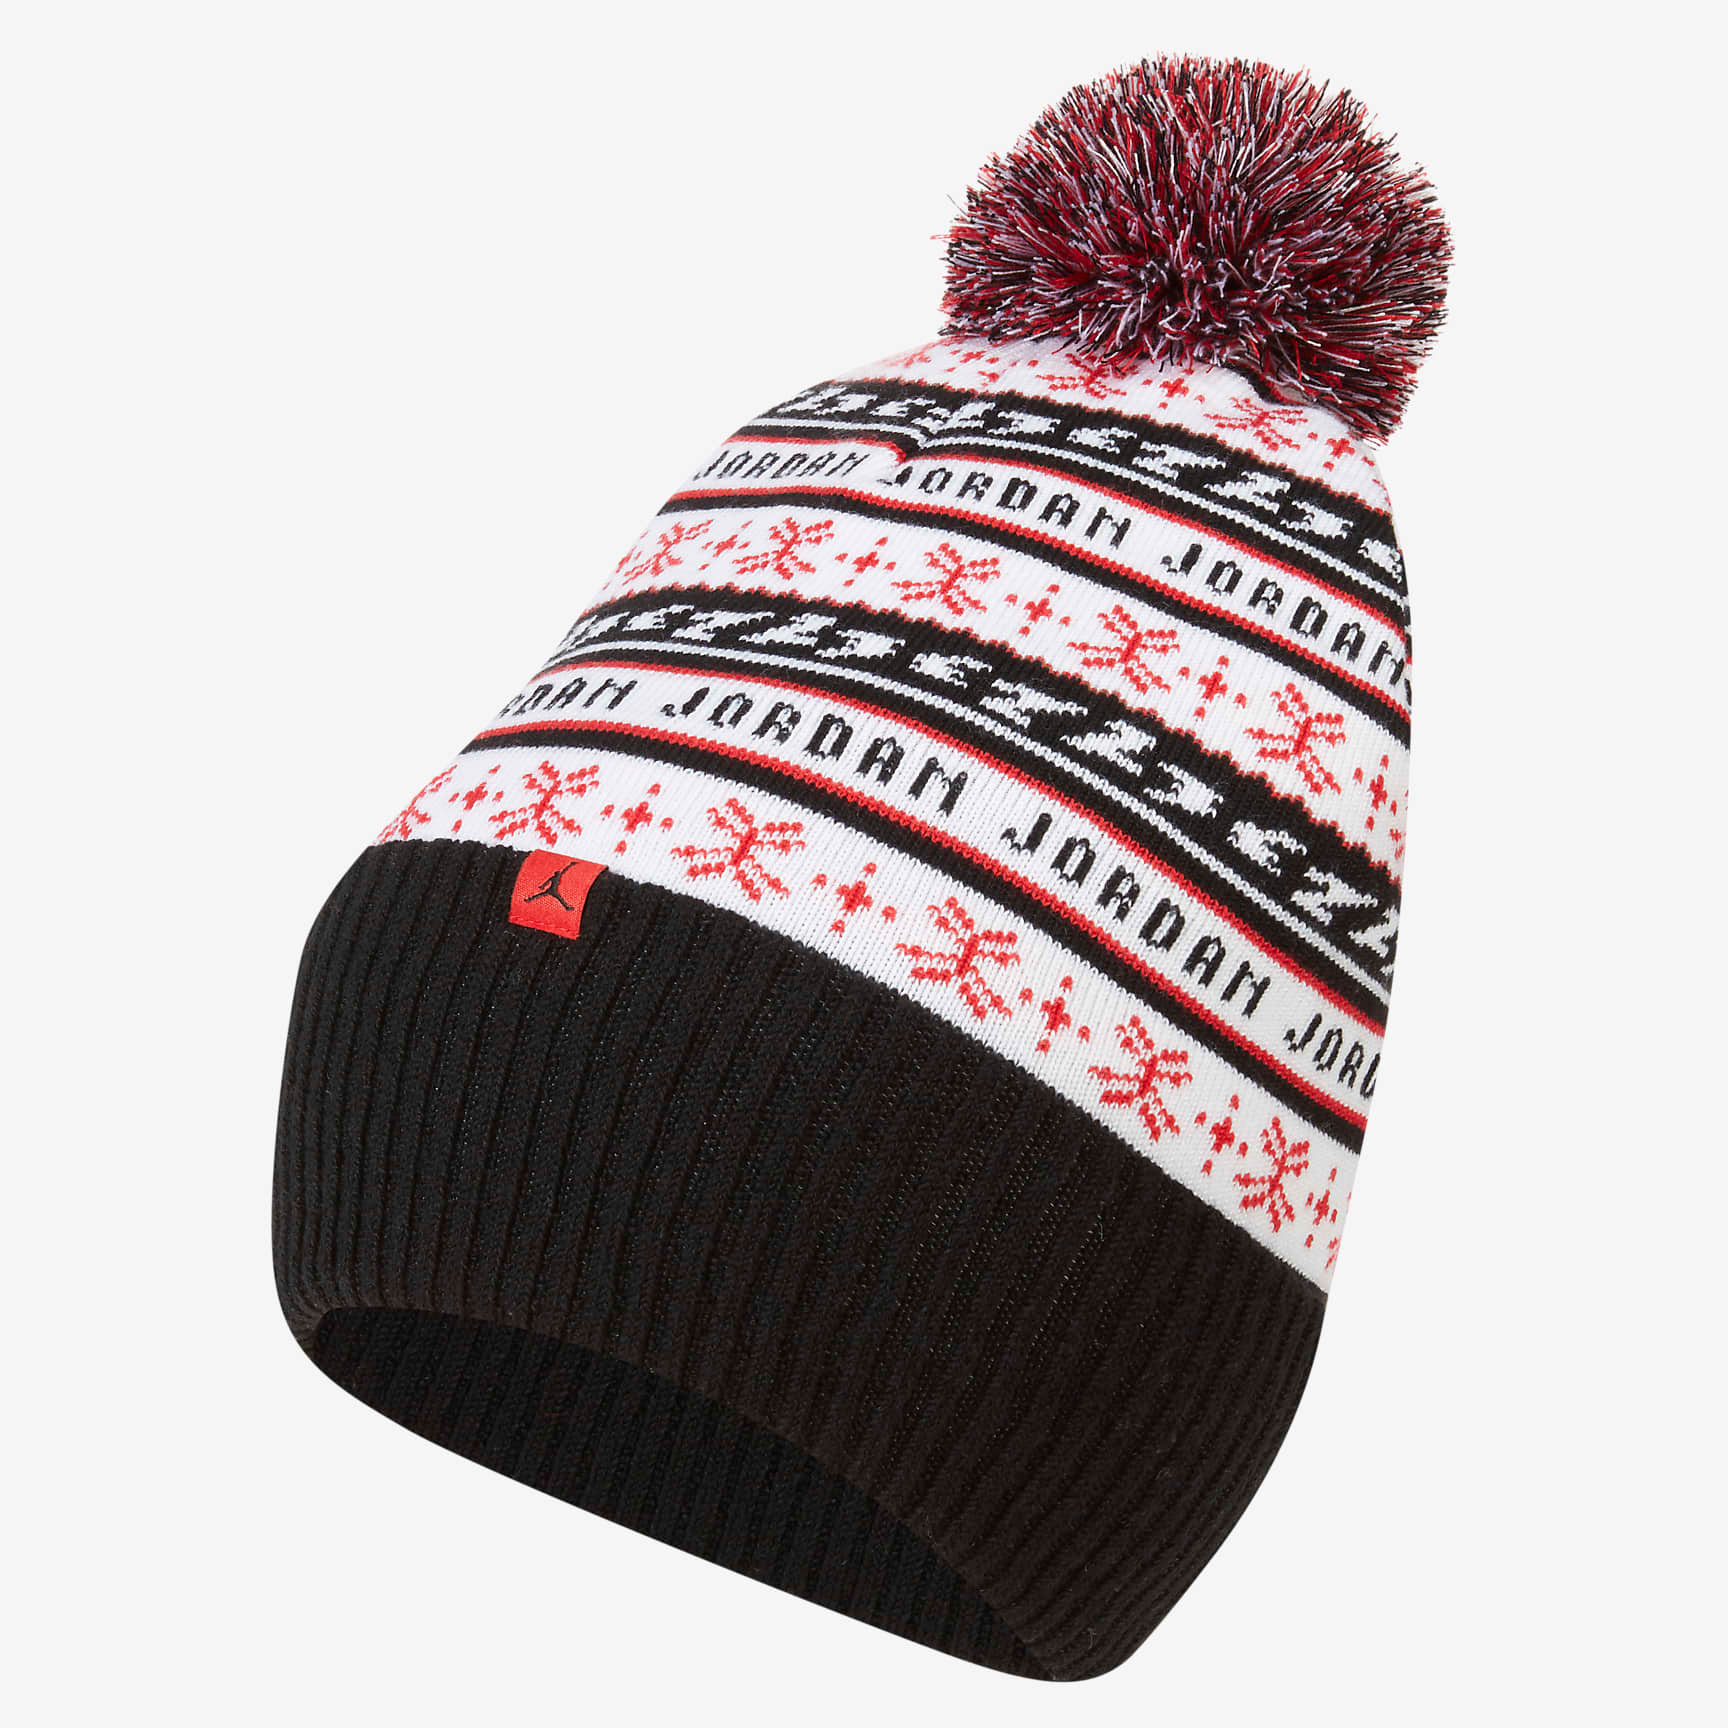 jordan-jumpman-holiday-ugly-sweater-beanie-hat-black-white-red-1